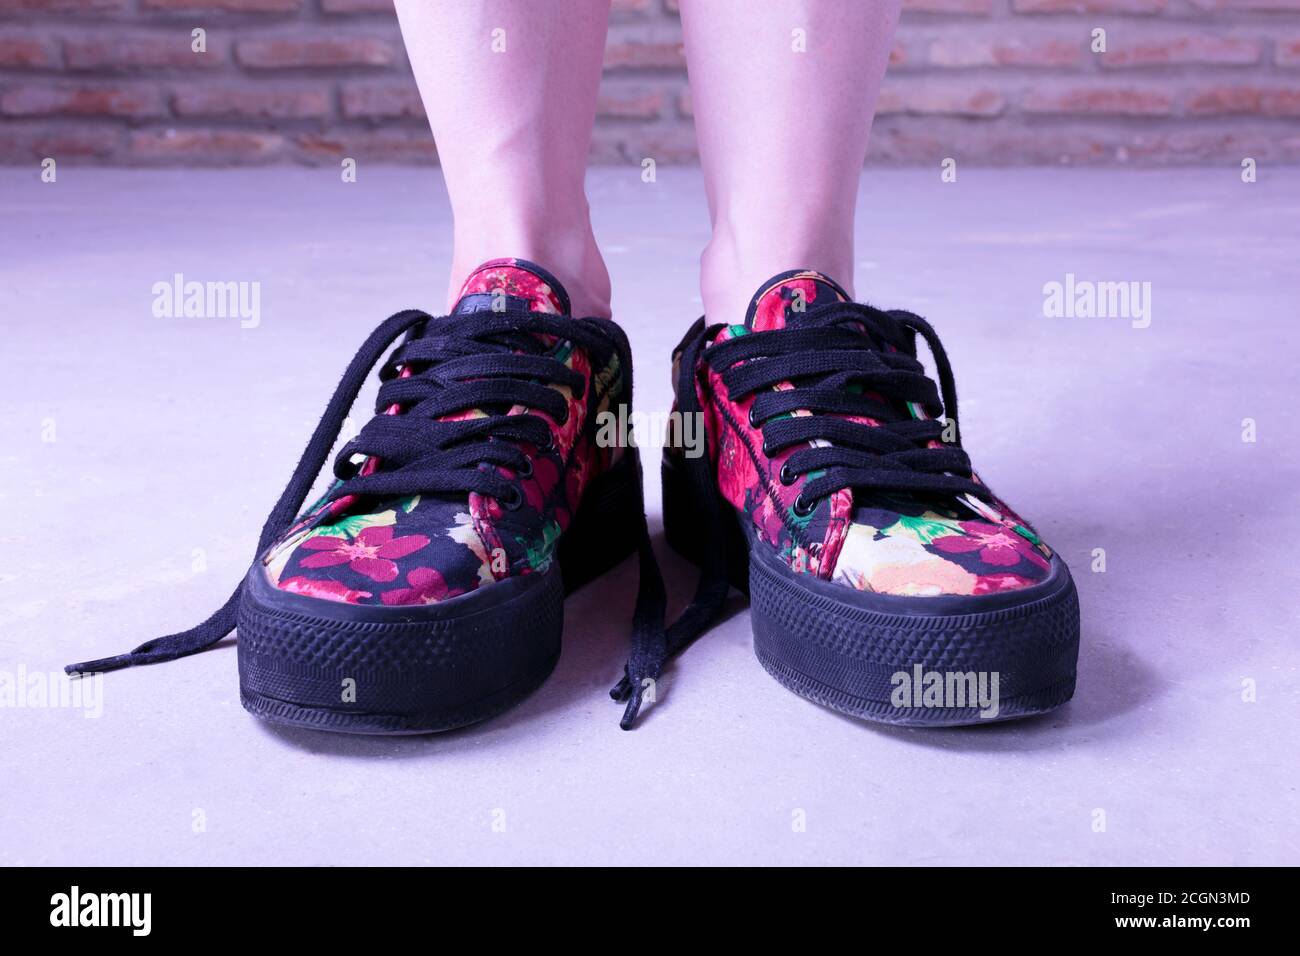 Vintage looking flowery shoes worn by a young woman Stock Photo